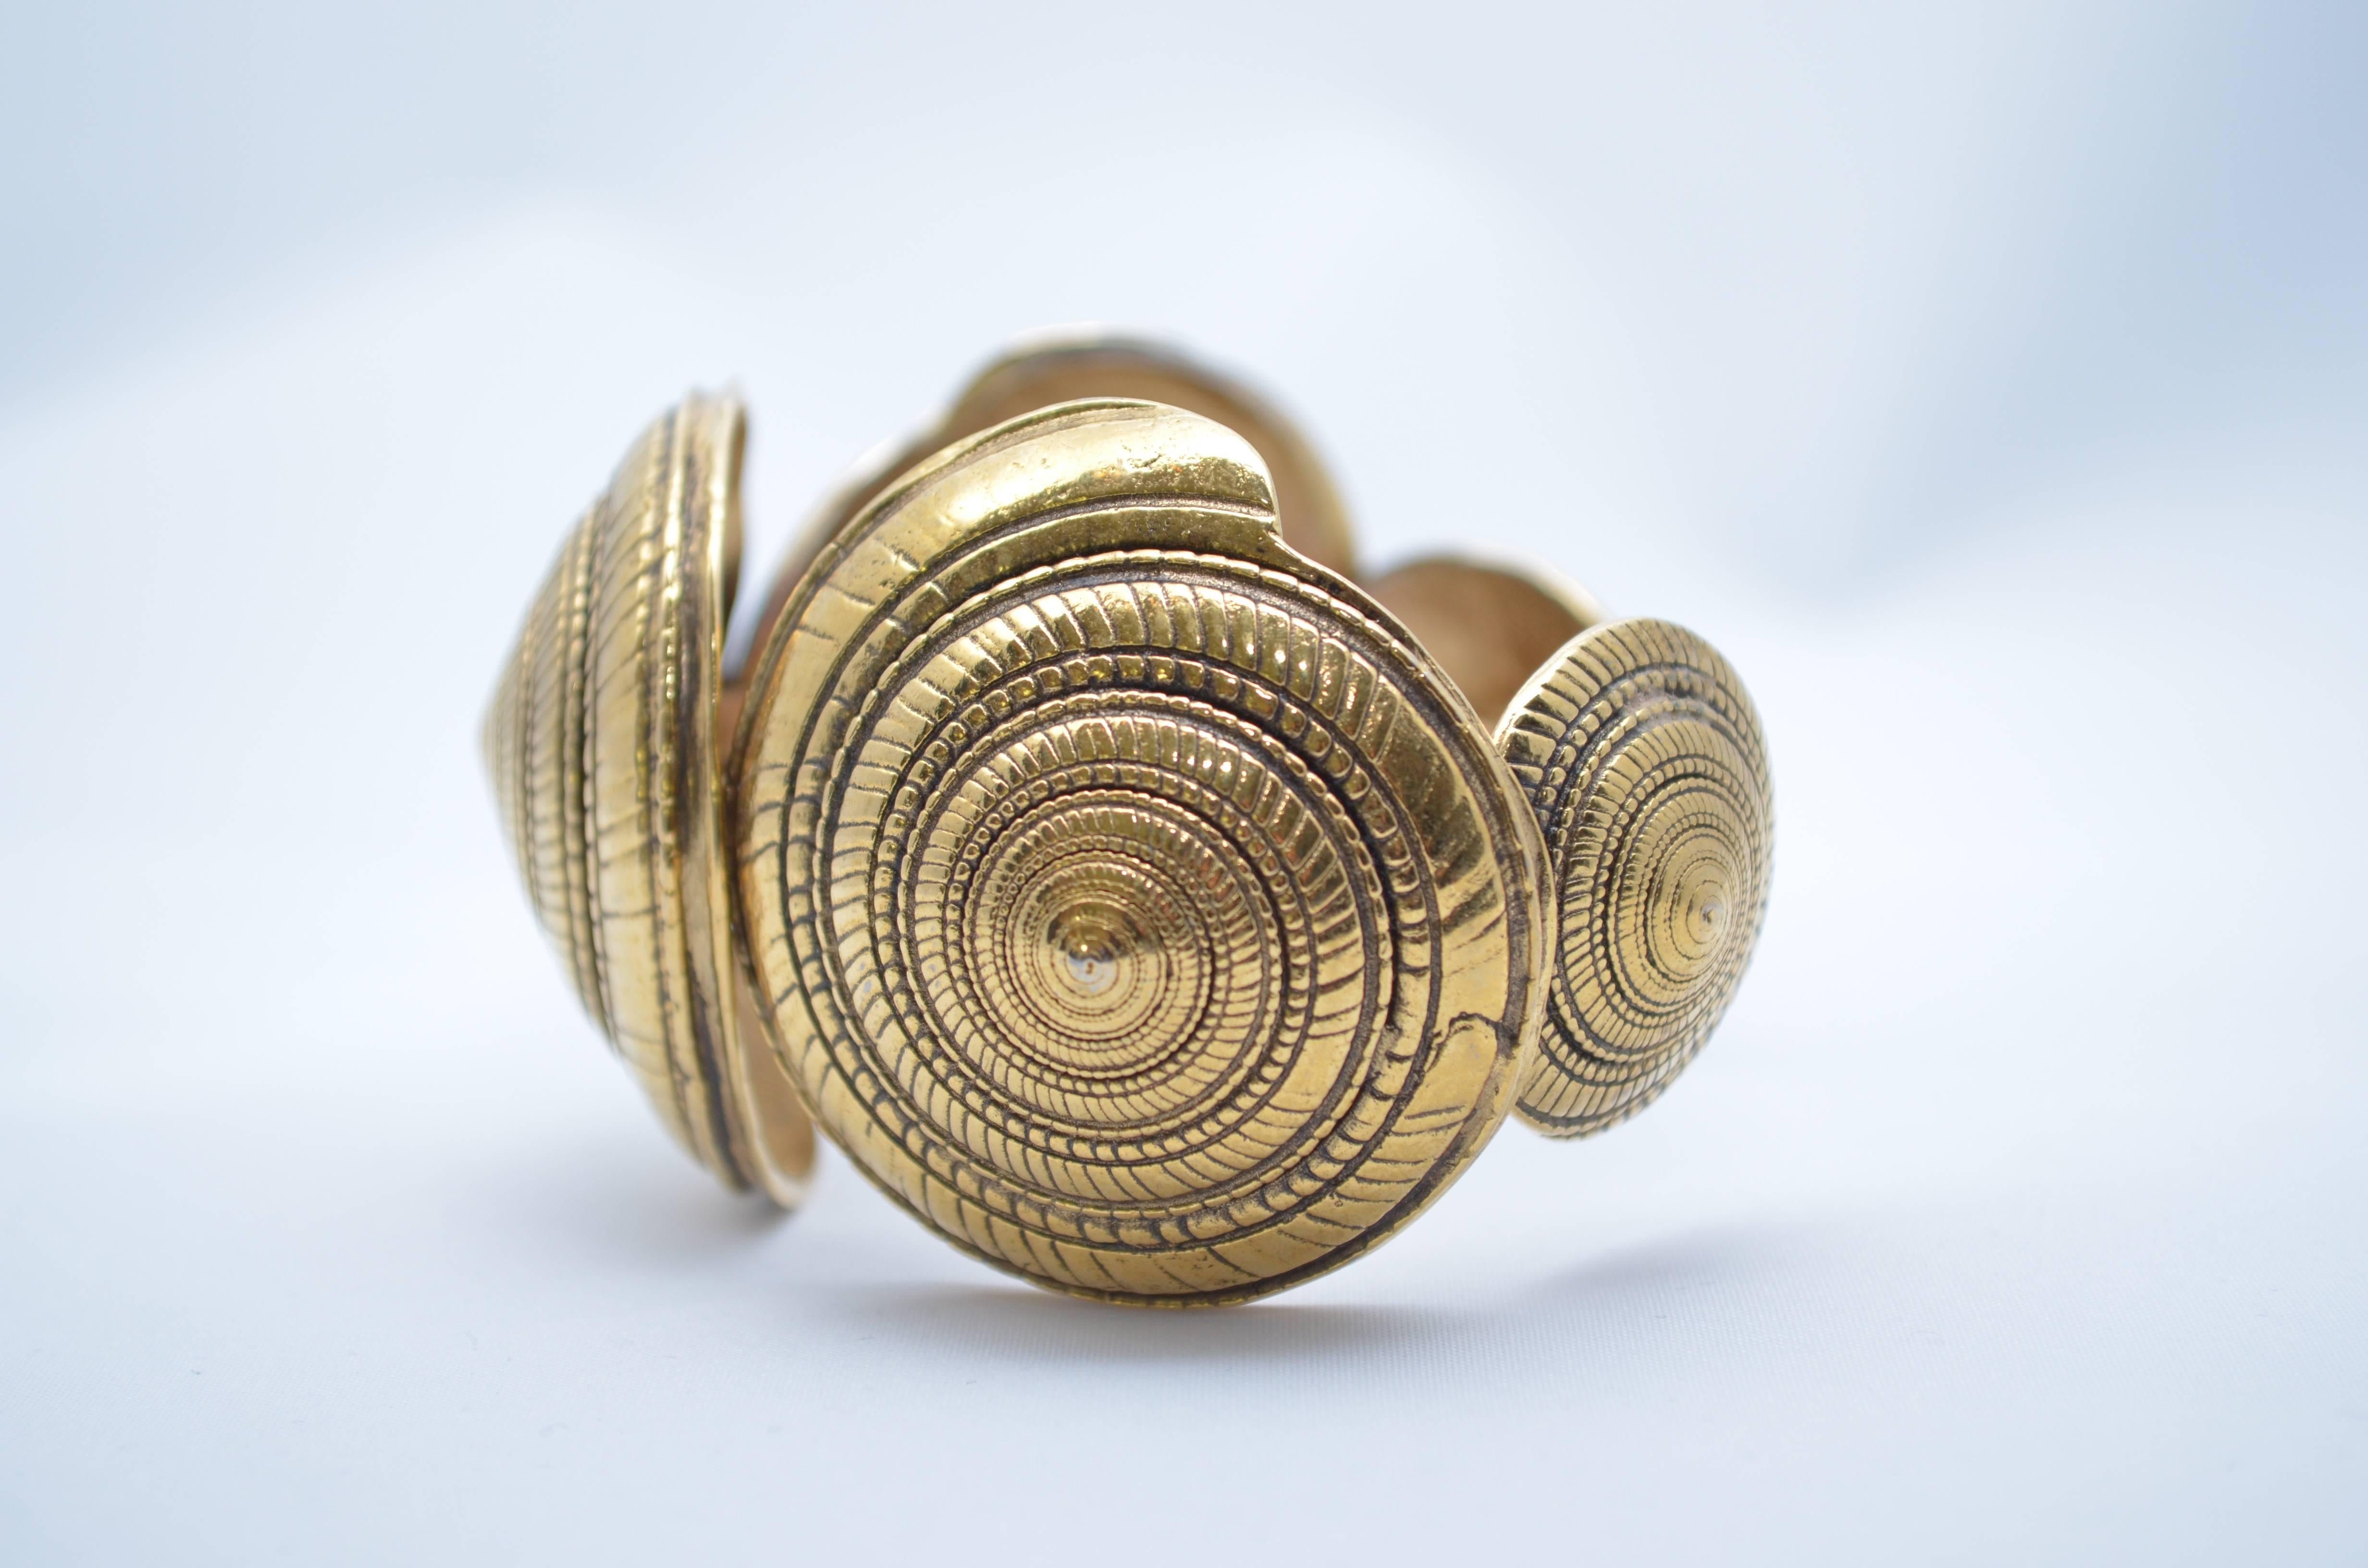 Yves Saint Laurent Rive Gauche 1970s Nautilus Shell Cuff

Gold base metal cuff made of five graduated metal etched nautilus shells with antique patina. Marked Yves Saint Laurent Rive Gauche Made in France. Excellent Condition. 